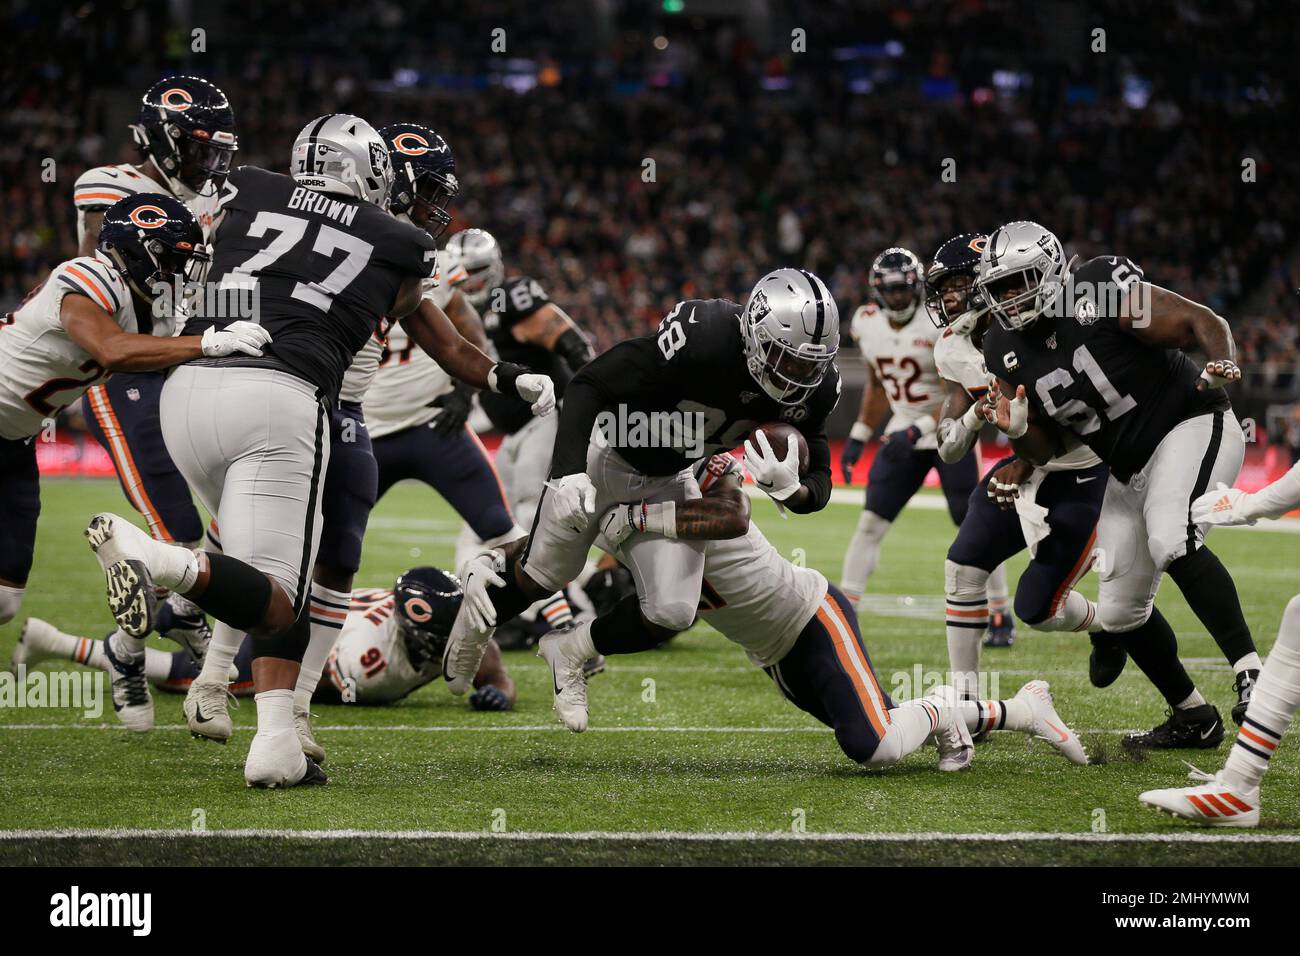 Oakland Raiders running back Josh Jacobs (28) breaks a tackle and goes in  for a touchdown during the first half of an NFL football game against the  Chicago Bears at Tottenham Hotspur